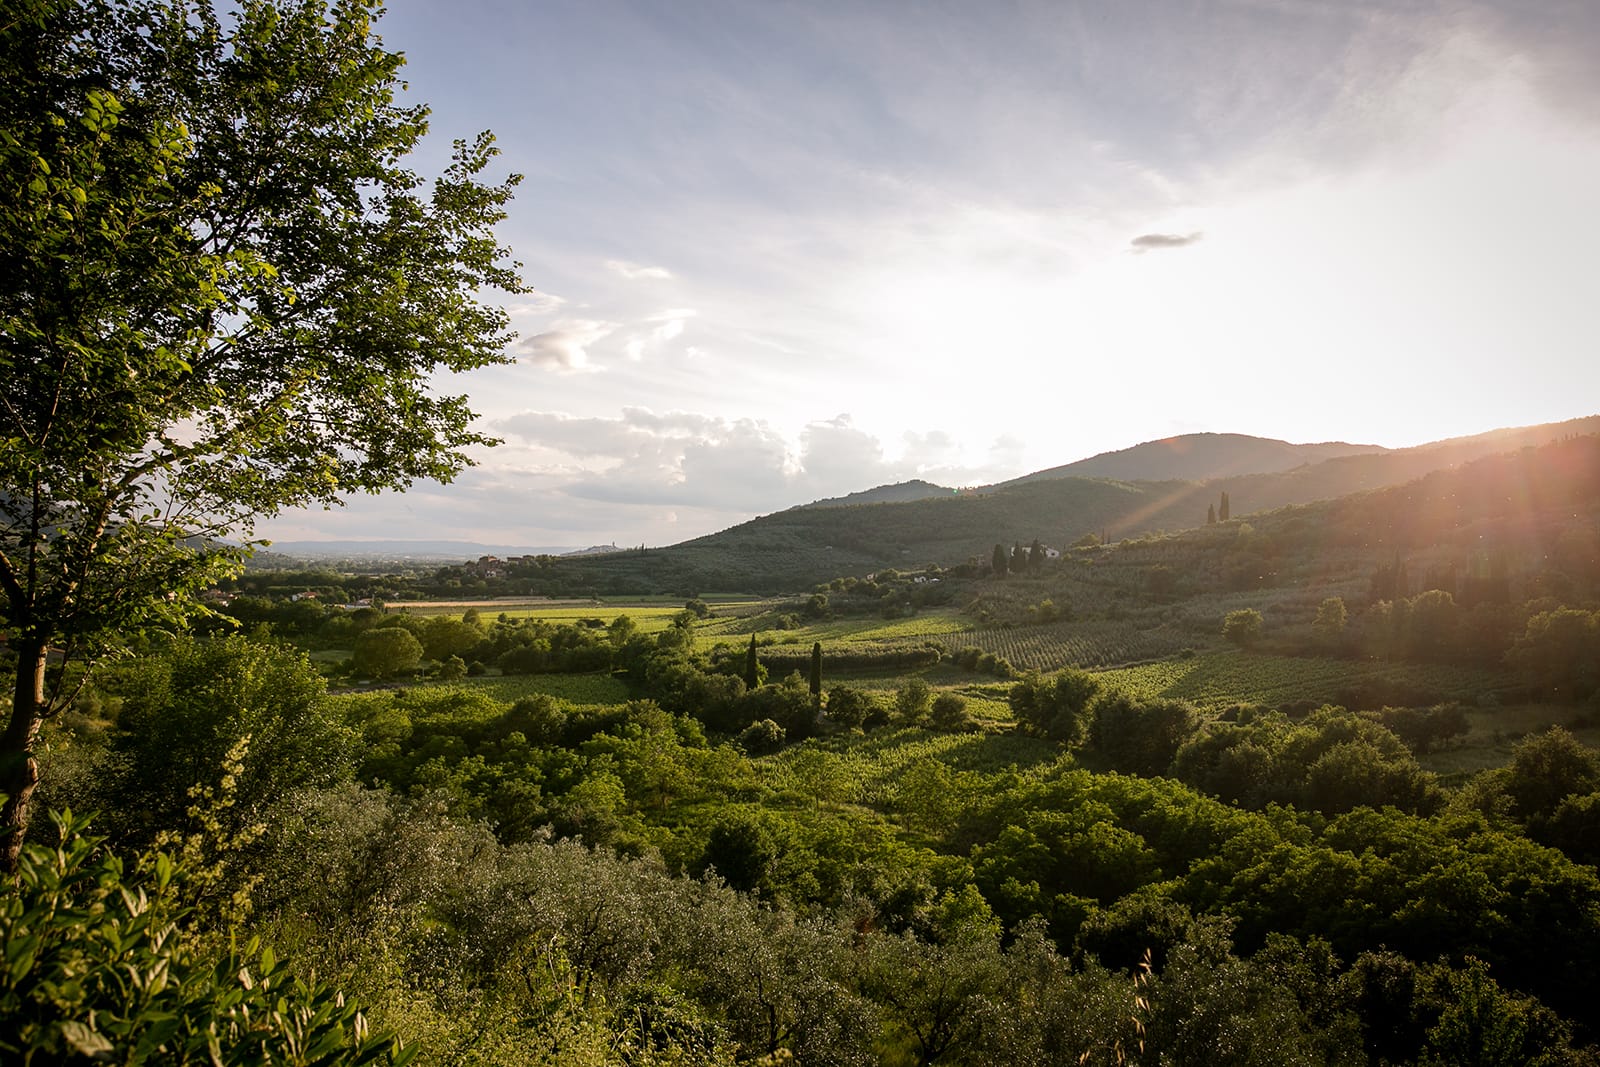 Farm Le Capanne. Images of the agricultural holding between Castiglion Fiorentino and Cortona